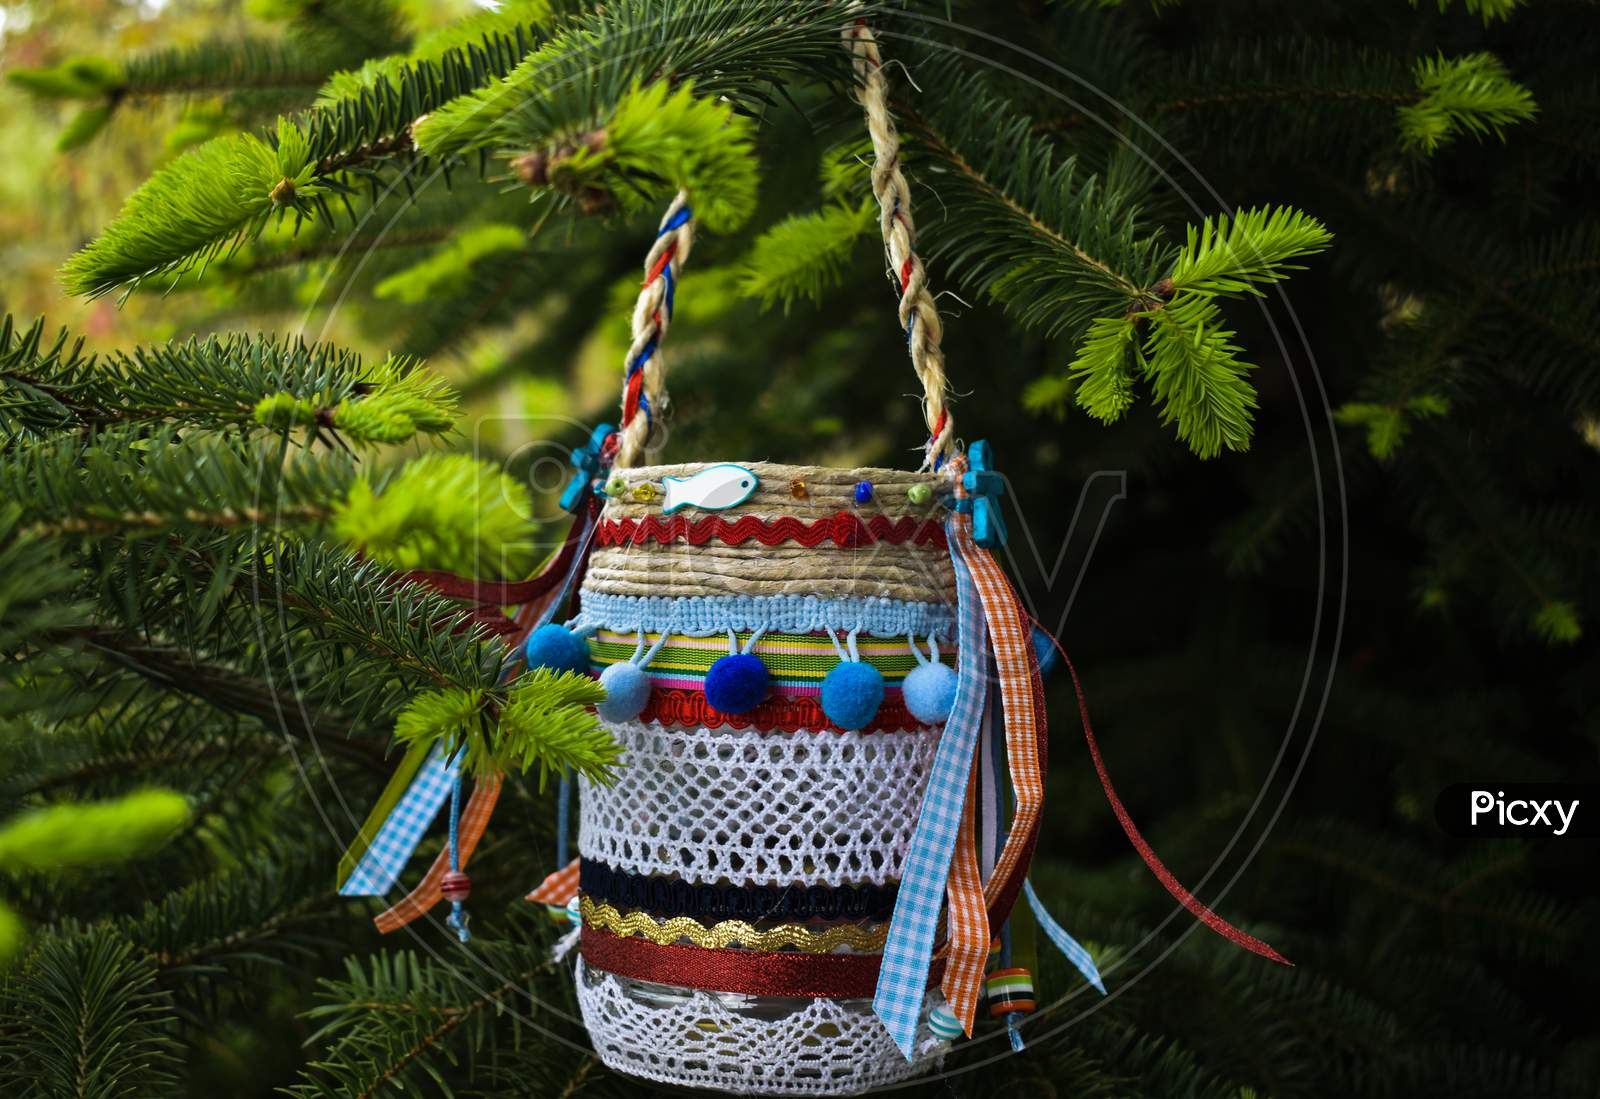 A Small Colorful Vase Hung On A Branch Of A Fir Tree